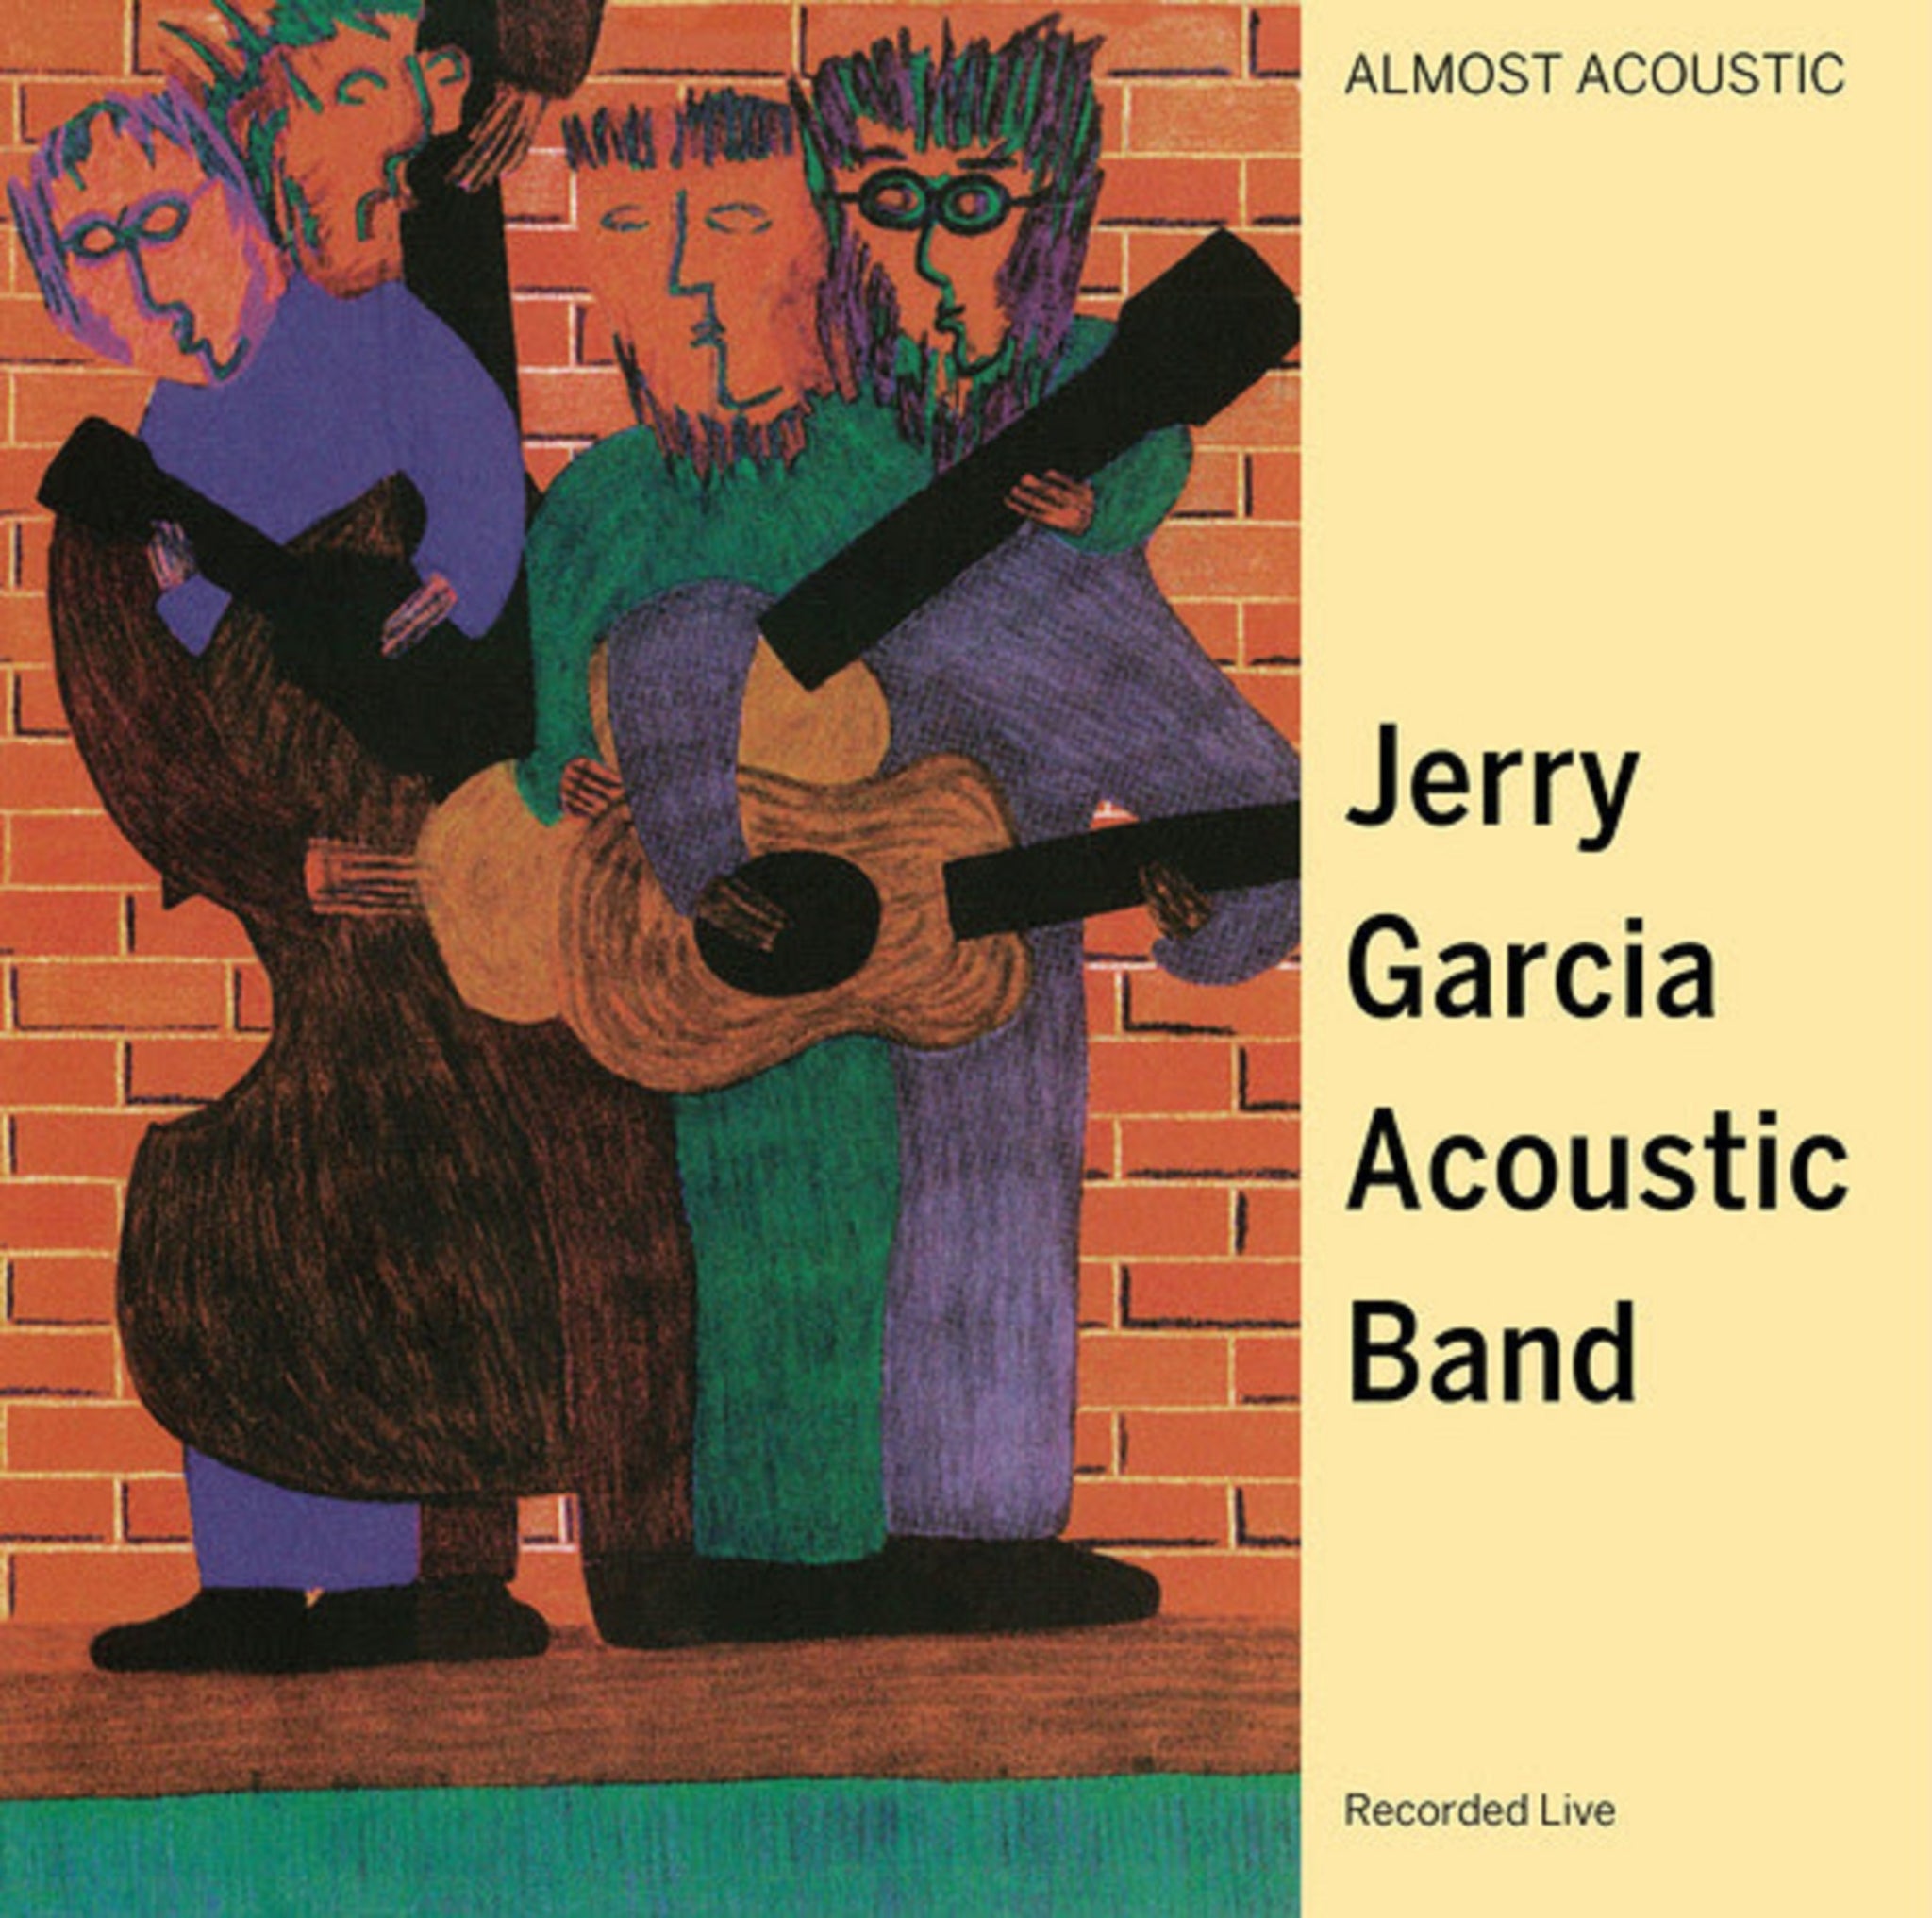 Jerry Garcia Acoustic Band - Almost Acoustic (Recorded Live in 1987) - New Vinyl 2 Lp 2018 RSD Black Friday Exclusive on 180gram Green Marbled Vinyl (Numbered to 5000) - Folk Rock